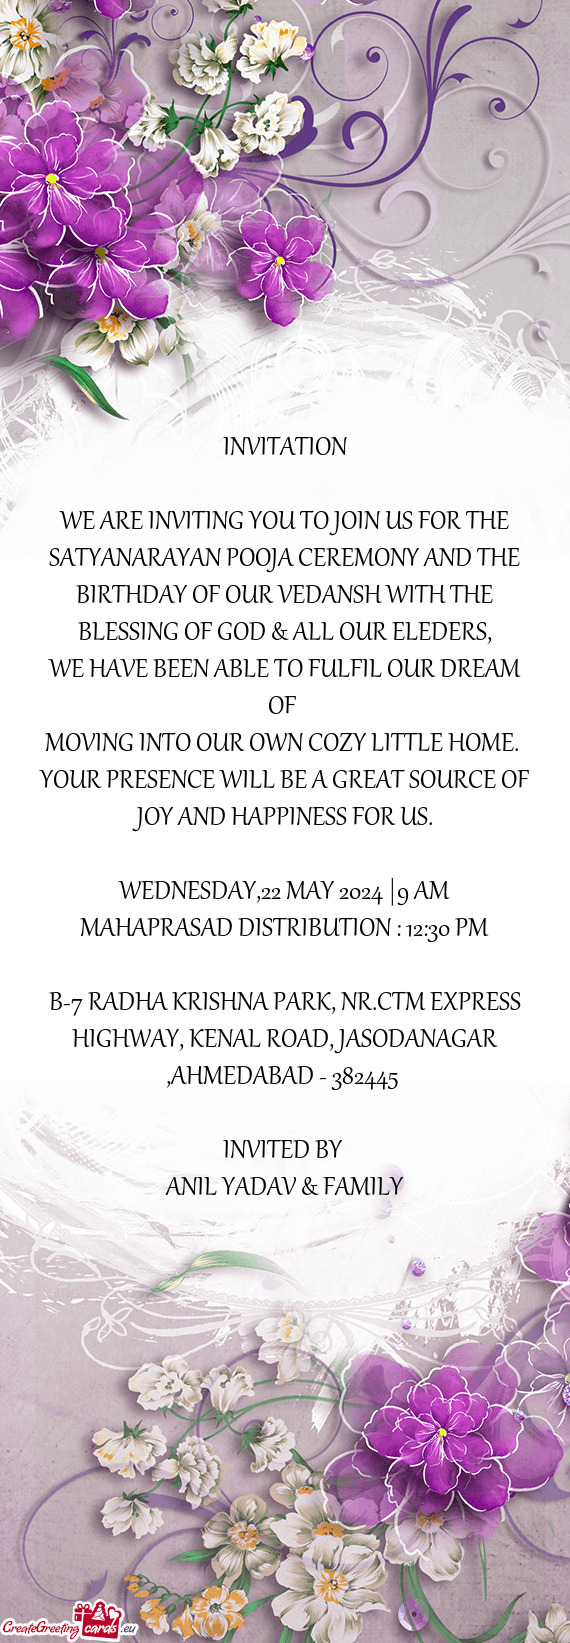 WE ARE INVITING YOU TO JOIN US FOR THE SATYANARAYAN POOJA CEREMONY AND THE BIRTHDAY OF OUR VEDANSH W